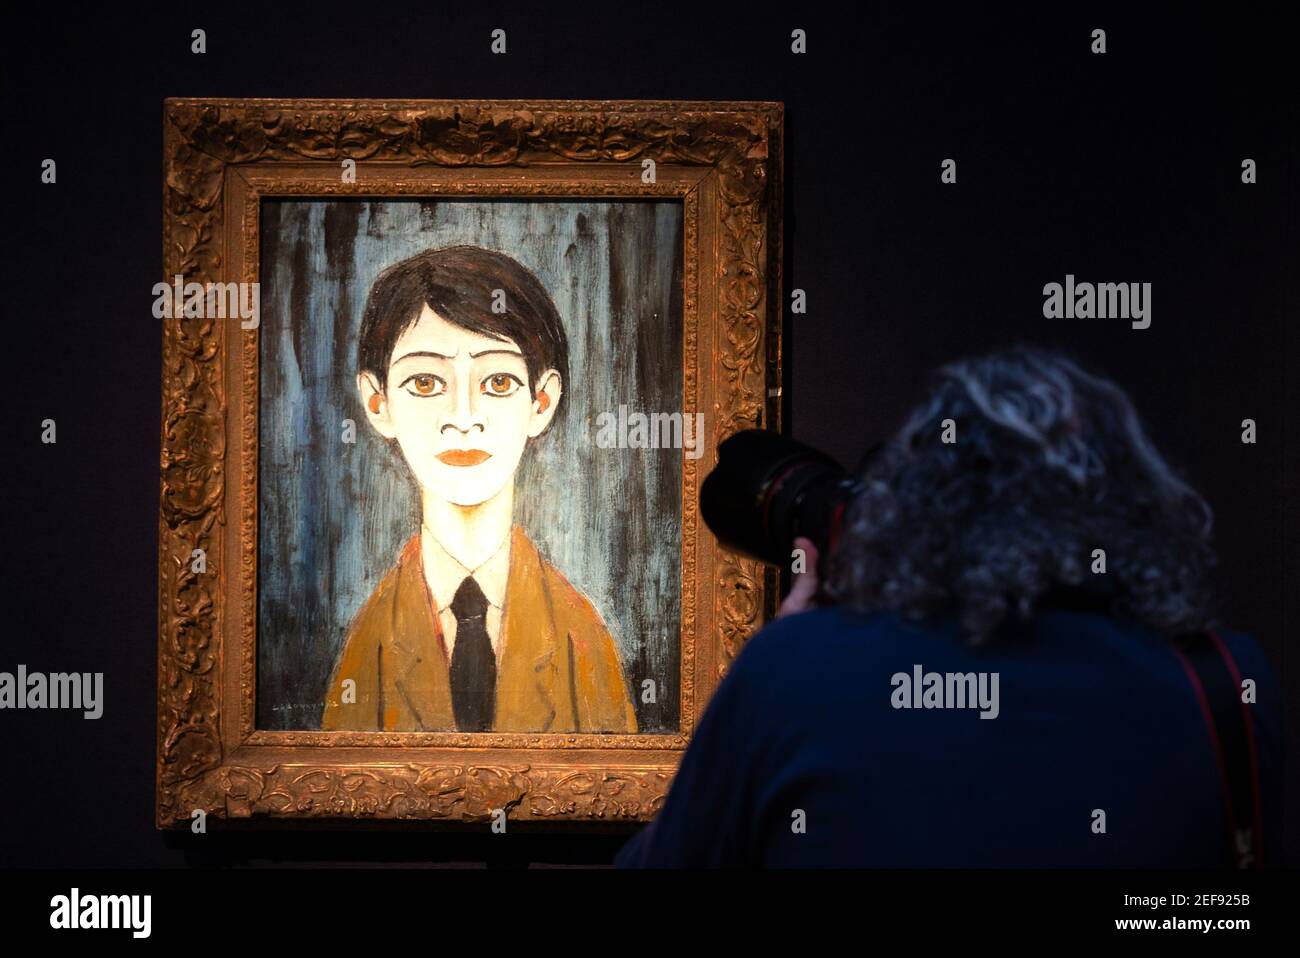 London, UK. 17th Feb, 2021. Head of a Boy painted by Laurence Stephen Lowry, Painted in 1962, Estimate: £300,000-500,000 'Behind Closed Doors: Preparations take place at Christie's ahead of the livestreamed Modern British Art Auction on 1 March 2021'. Credit: Mark Thomas/Alamy Live News Stock Photo